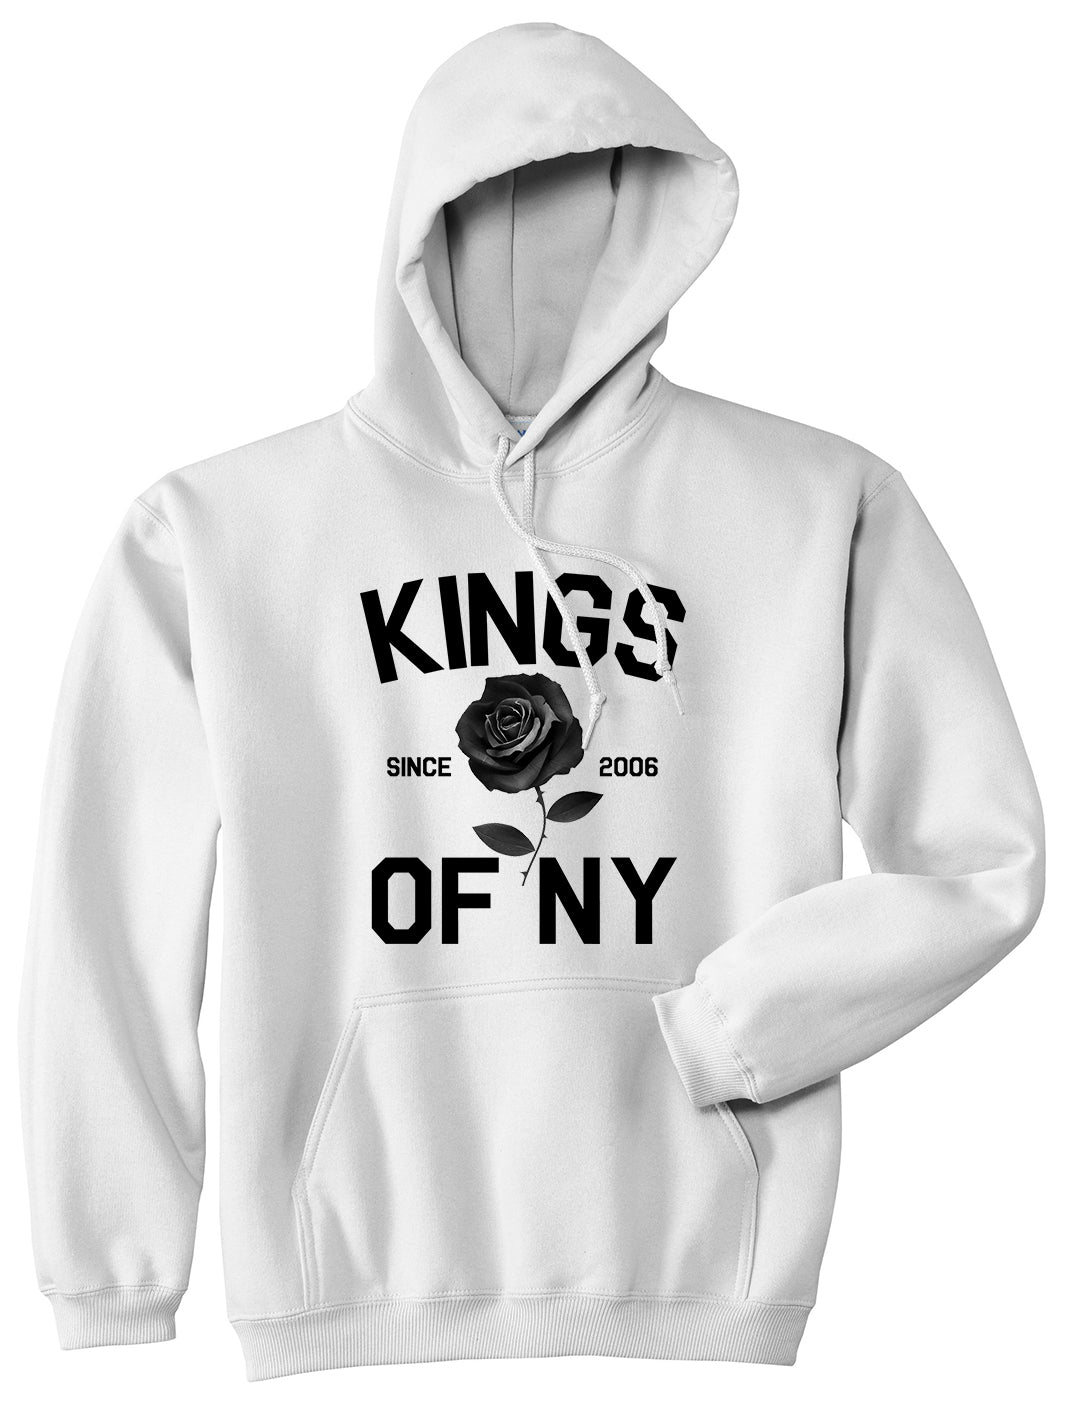 Black Rose Since 2006 Mens Pullover Hoodie White by Kings Of NY